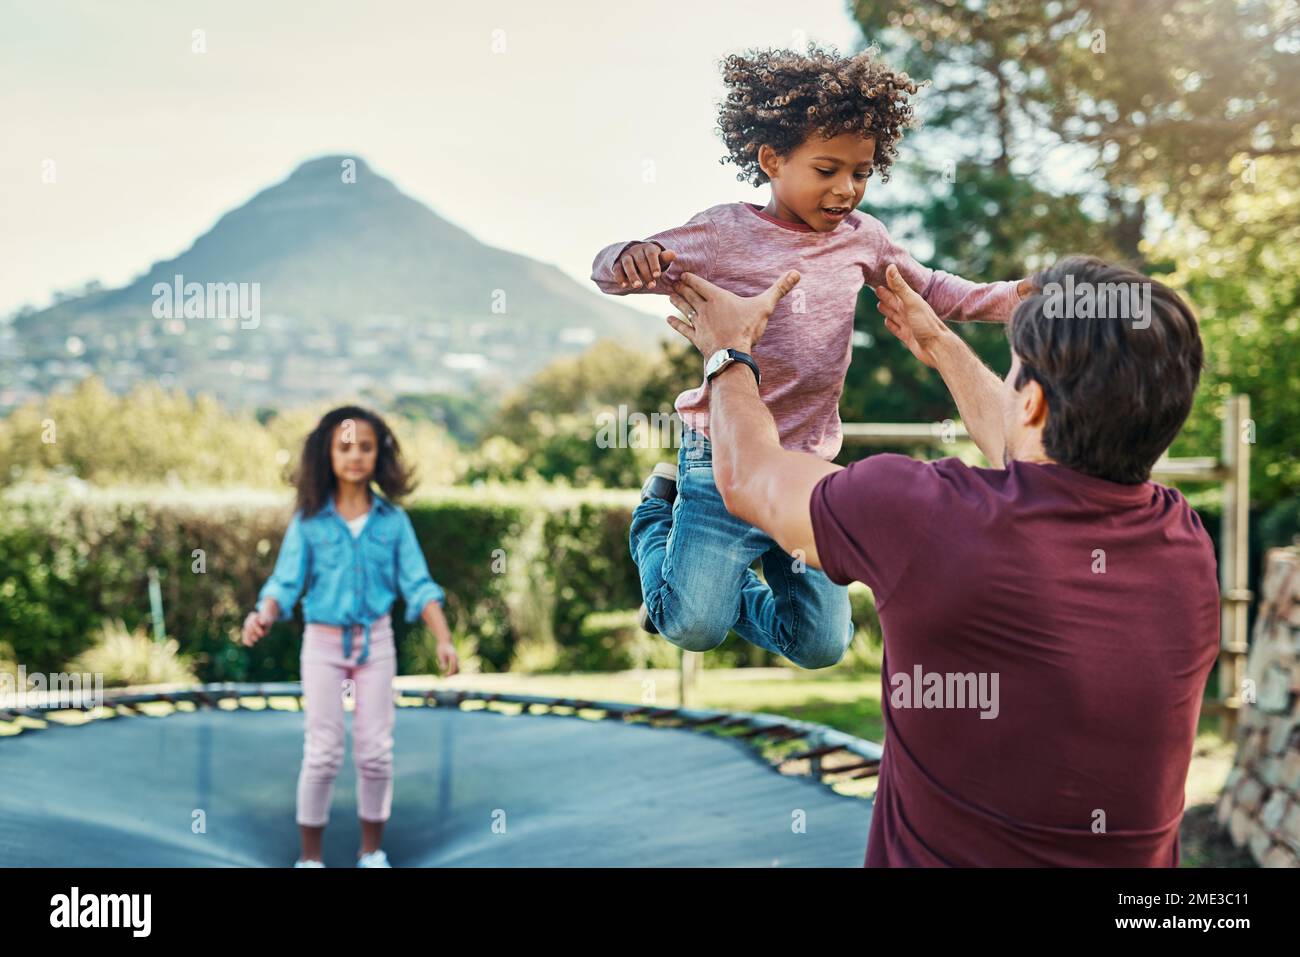 My children mean everything to me. Shot a father playing with his young children at a park outdoors. Stock Photo